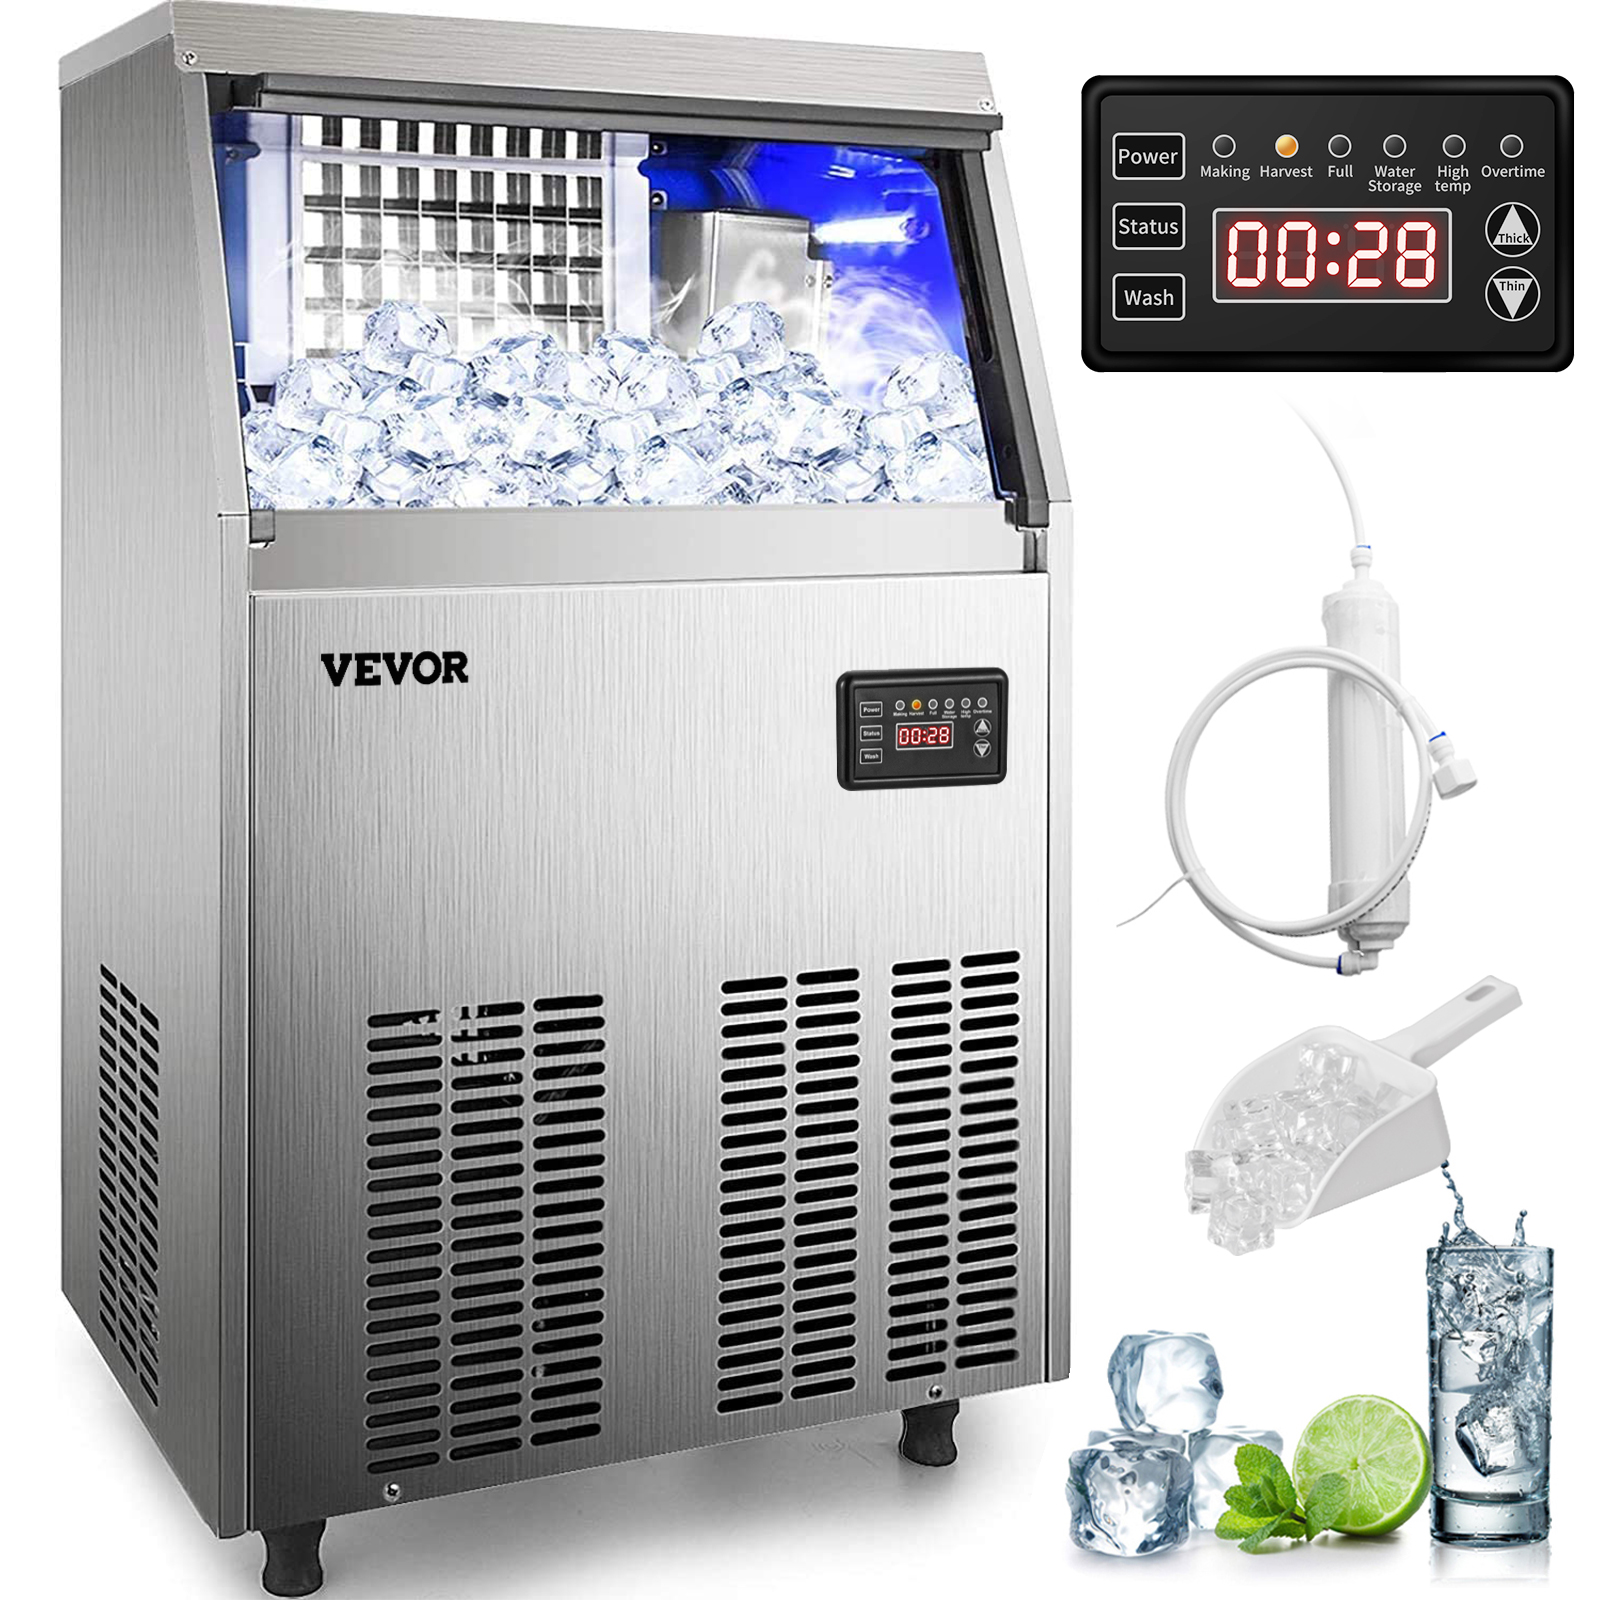 https://d2qc09rl1gfuof.cloudfront.net/product/ZBJ40KGSYP70-4001/commercial-ice-maker-m100-1.2.jpg